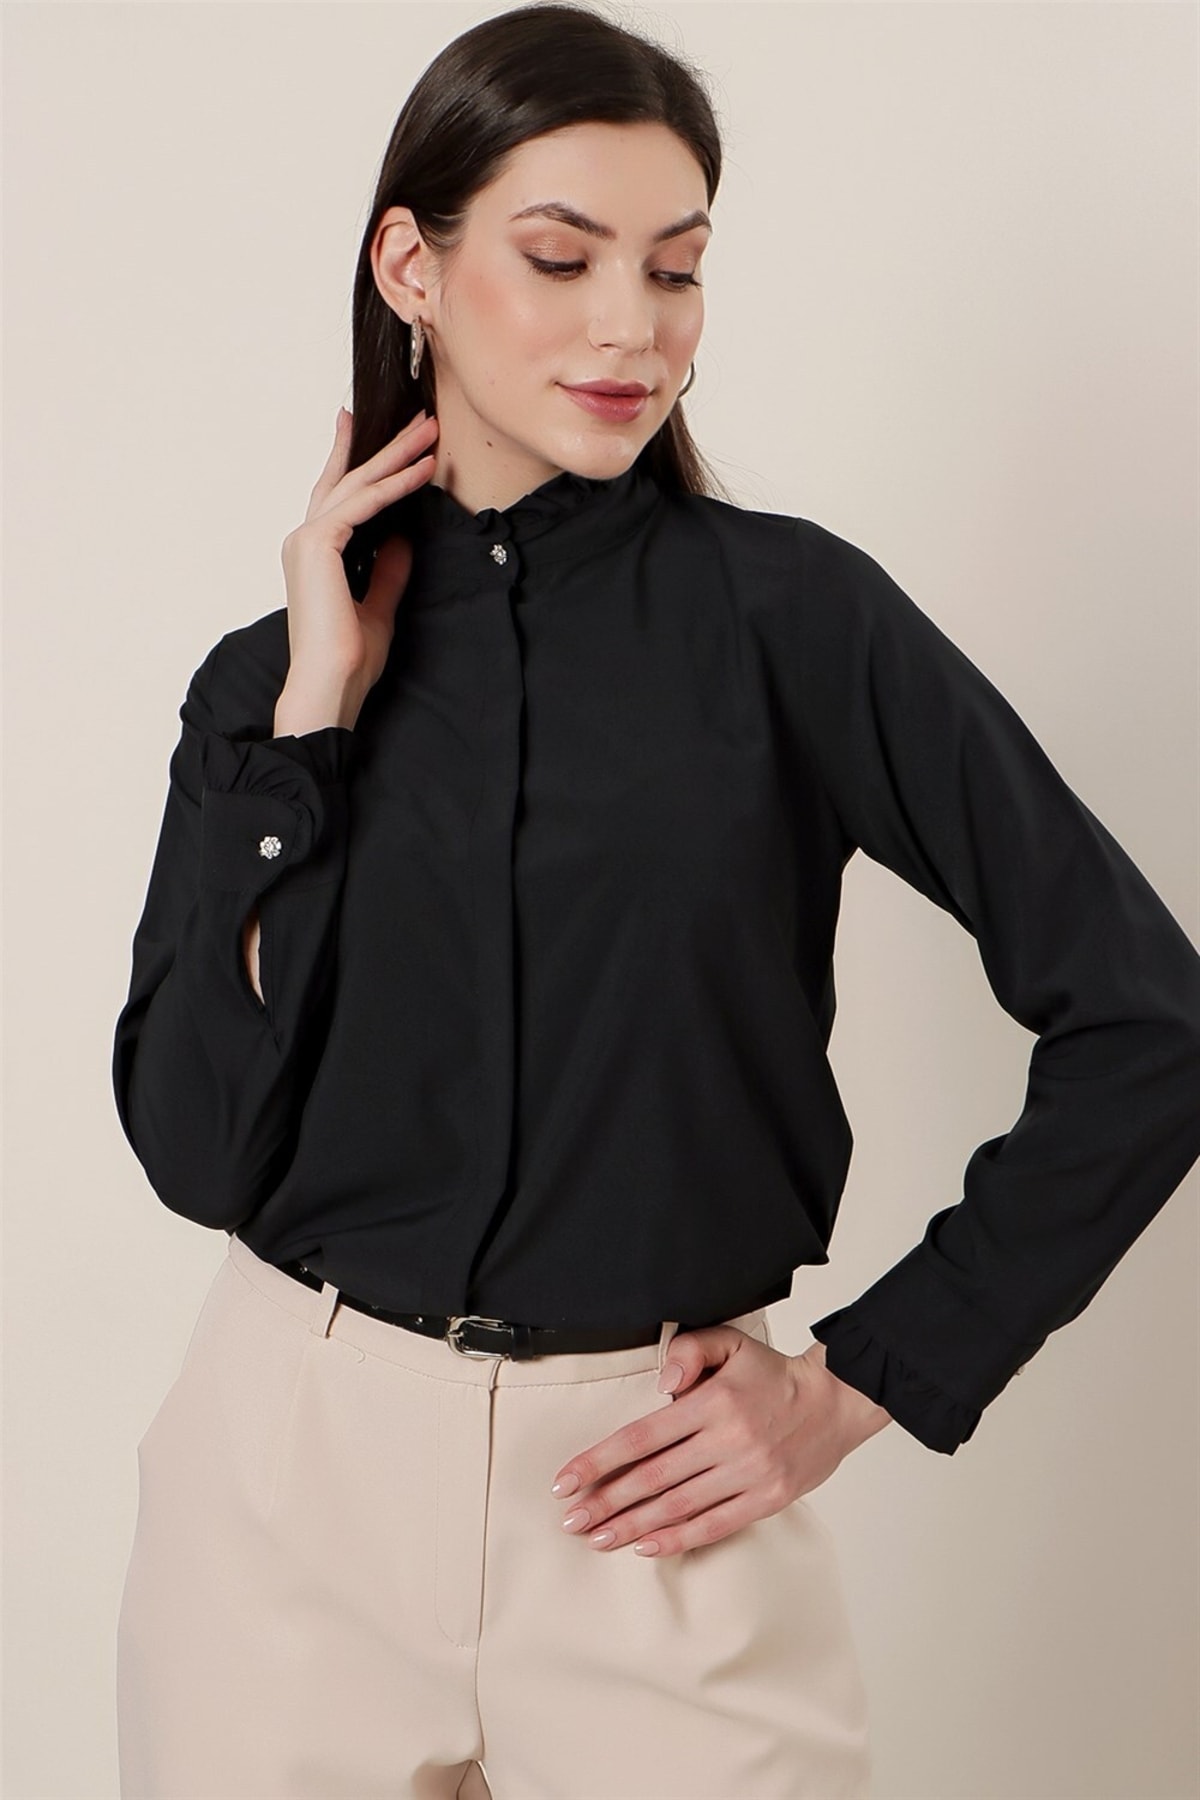 Levně By Saygı Imported Micro-Crepe Shirt Black with Frills around the Collar and Sleeves.